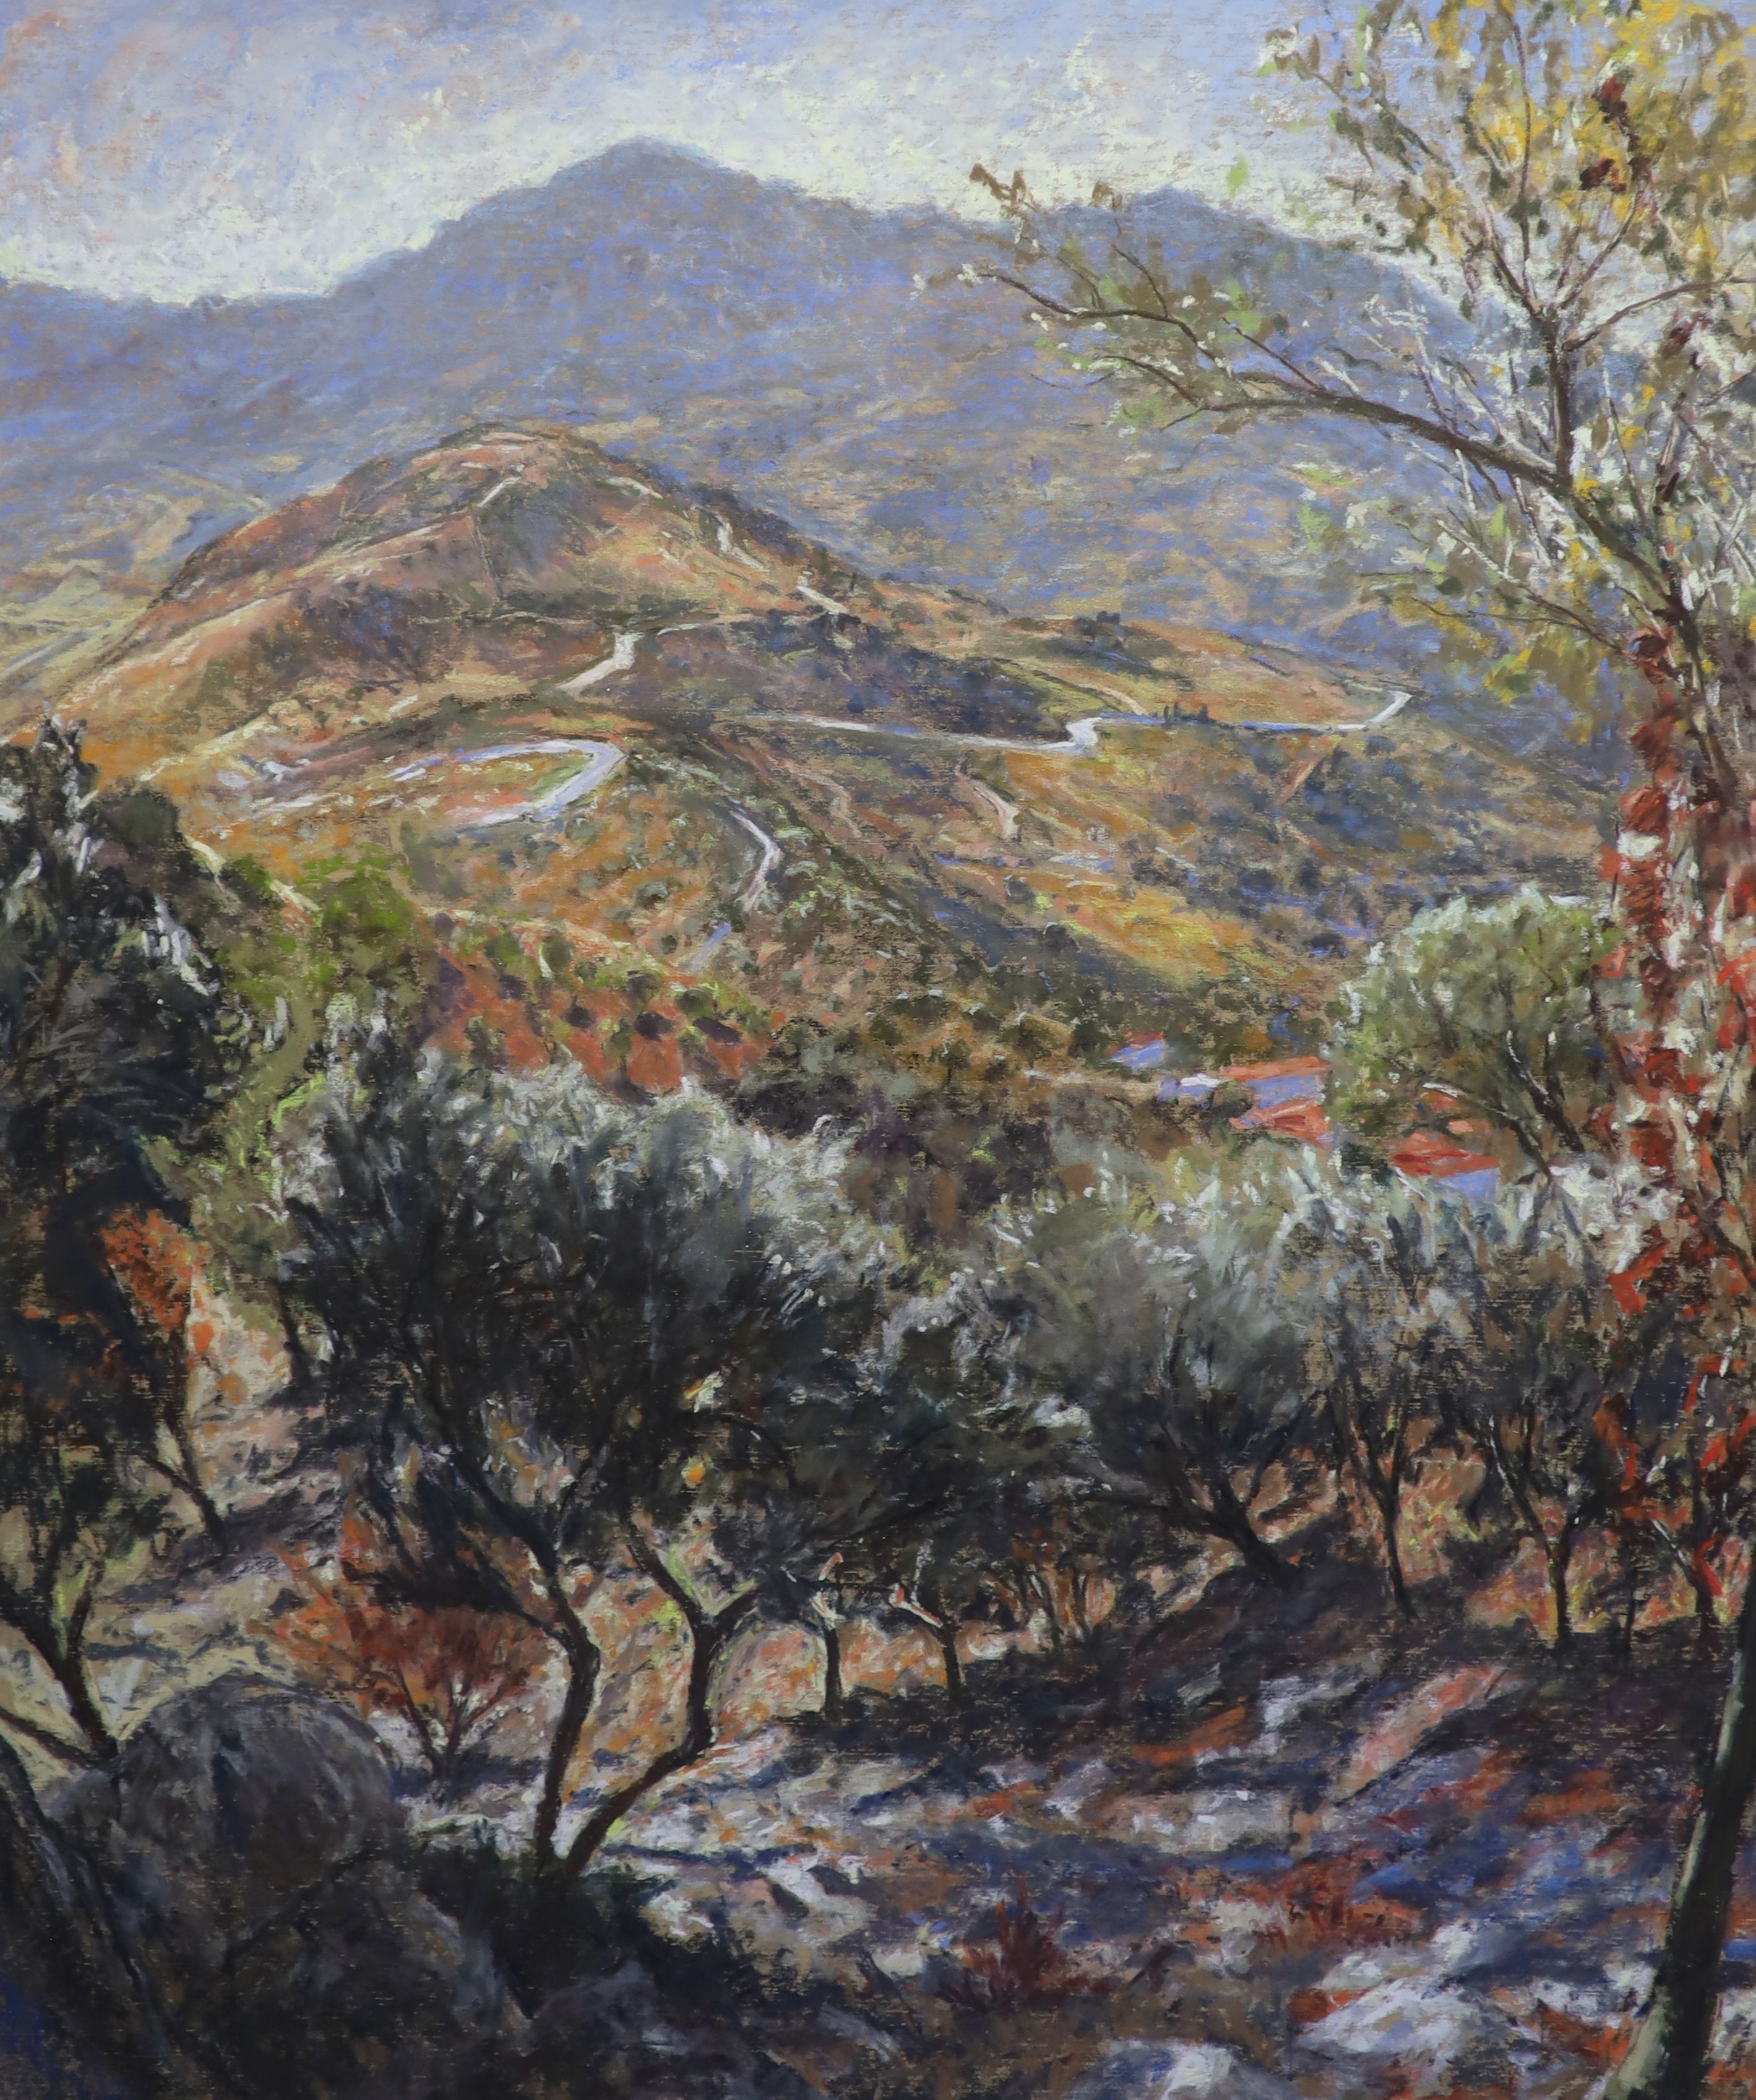 Patrick Cullen (Contemporary), Scorched Earth Mountains of Andalusia, mixed media, 90 x 74cm.